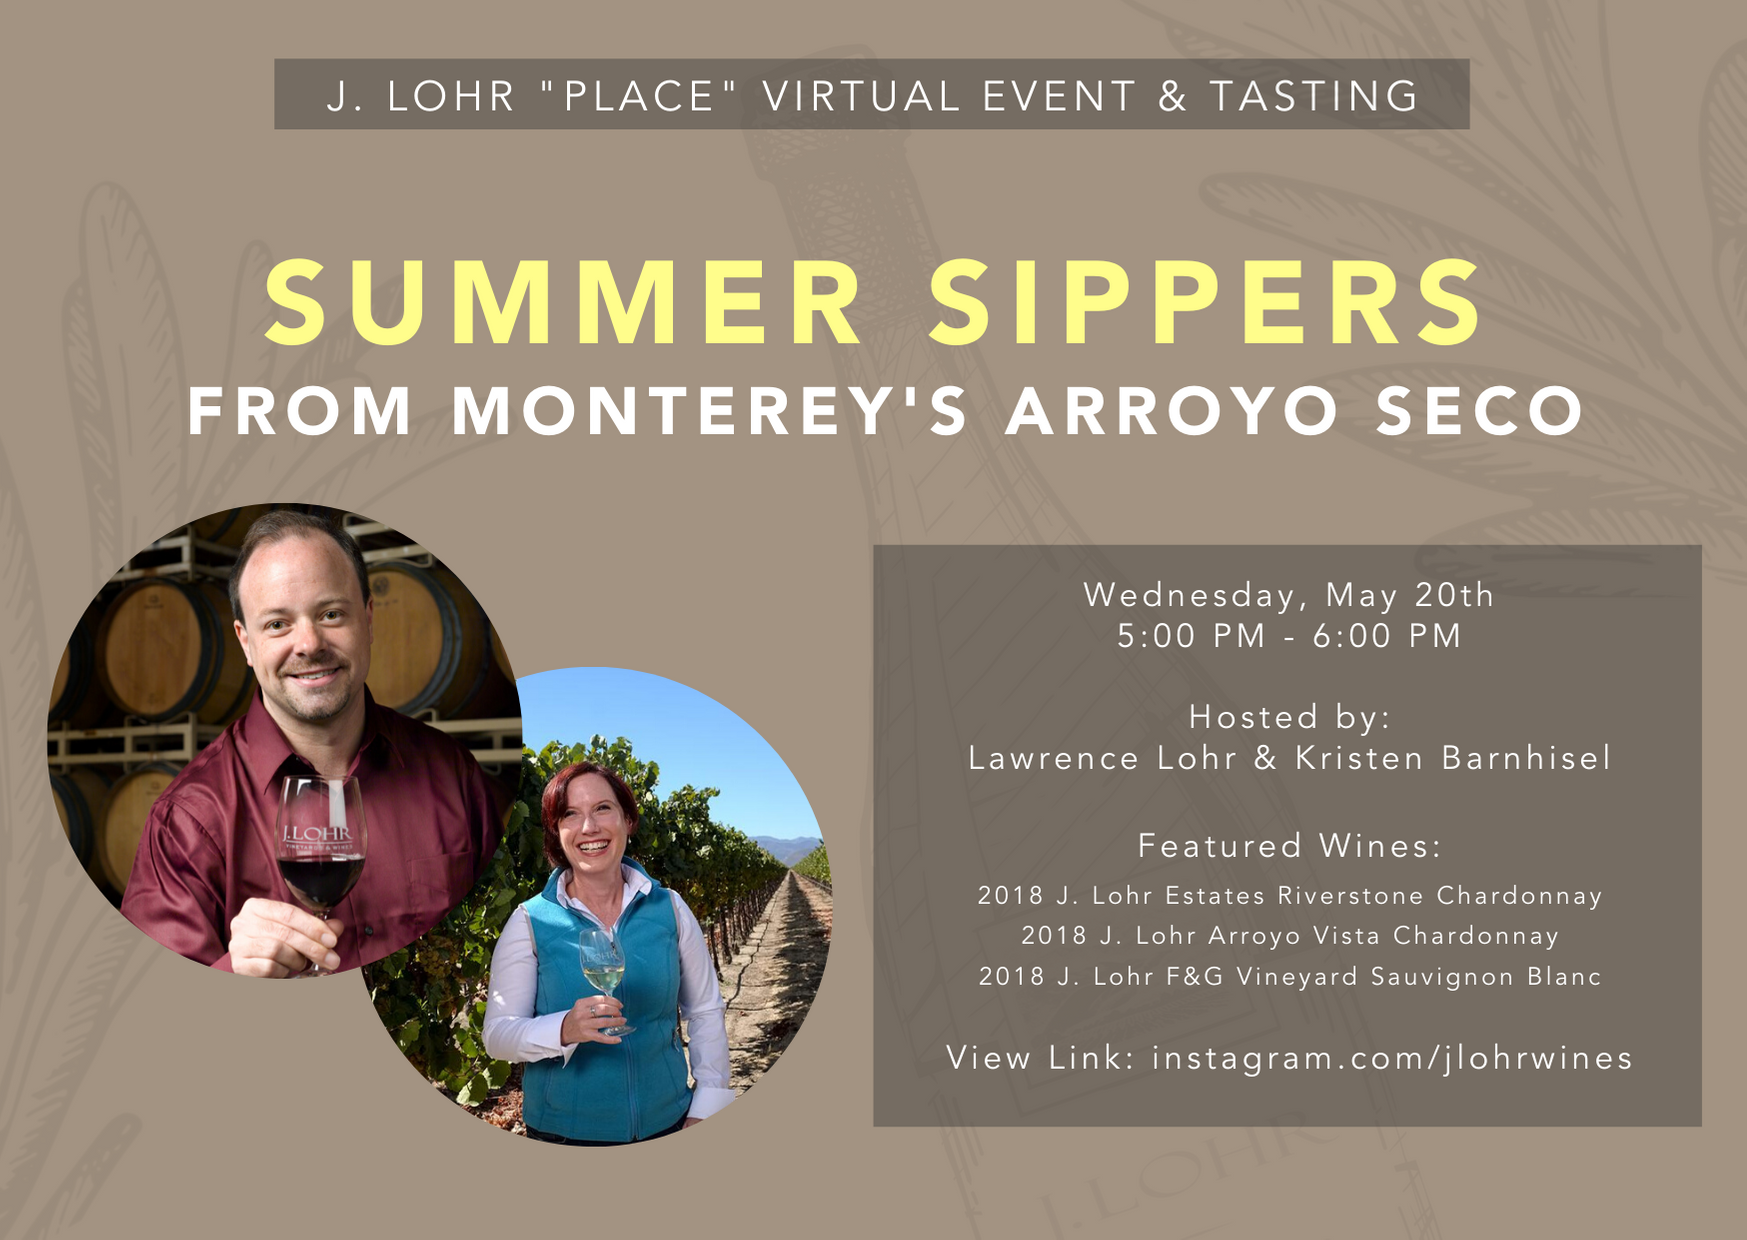 Summer Sippers from Monterey’s Arroyo Seco: A J. Lohr ‘Place’ Virtual Event and Tasting with Lawrence Lohr and Kristen Barnhisel